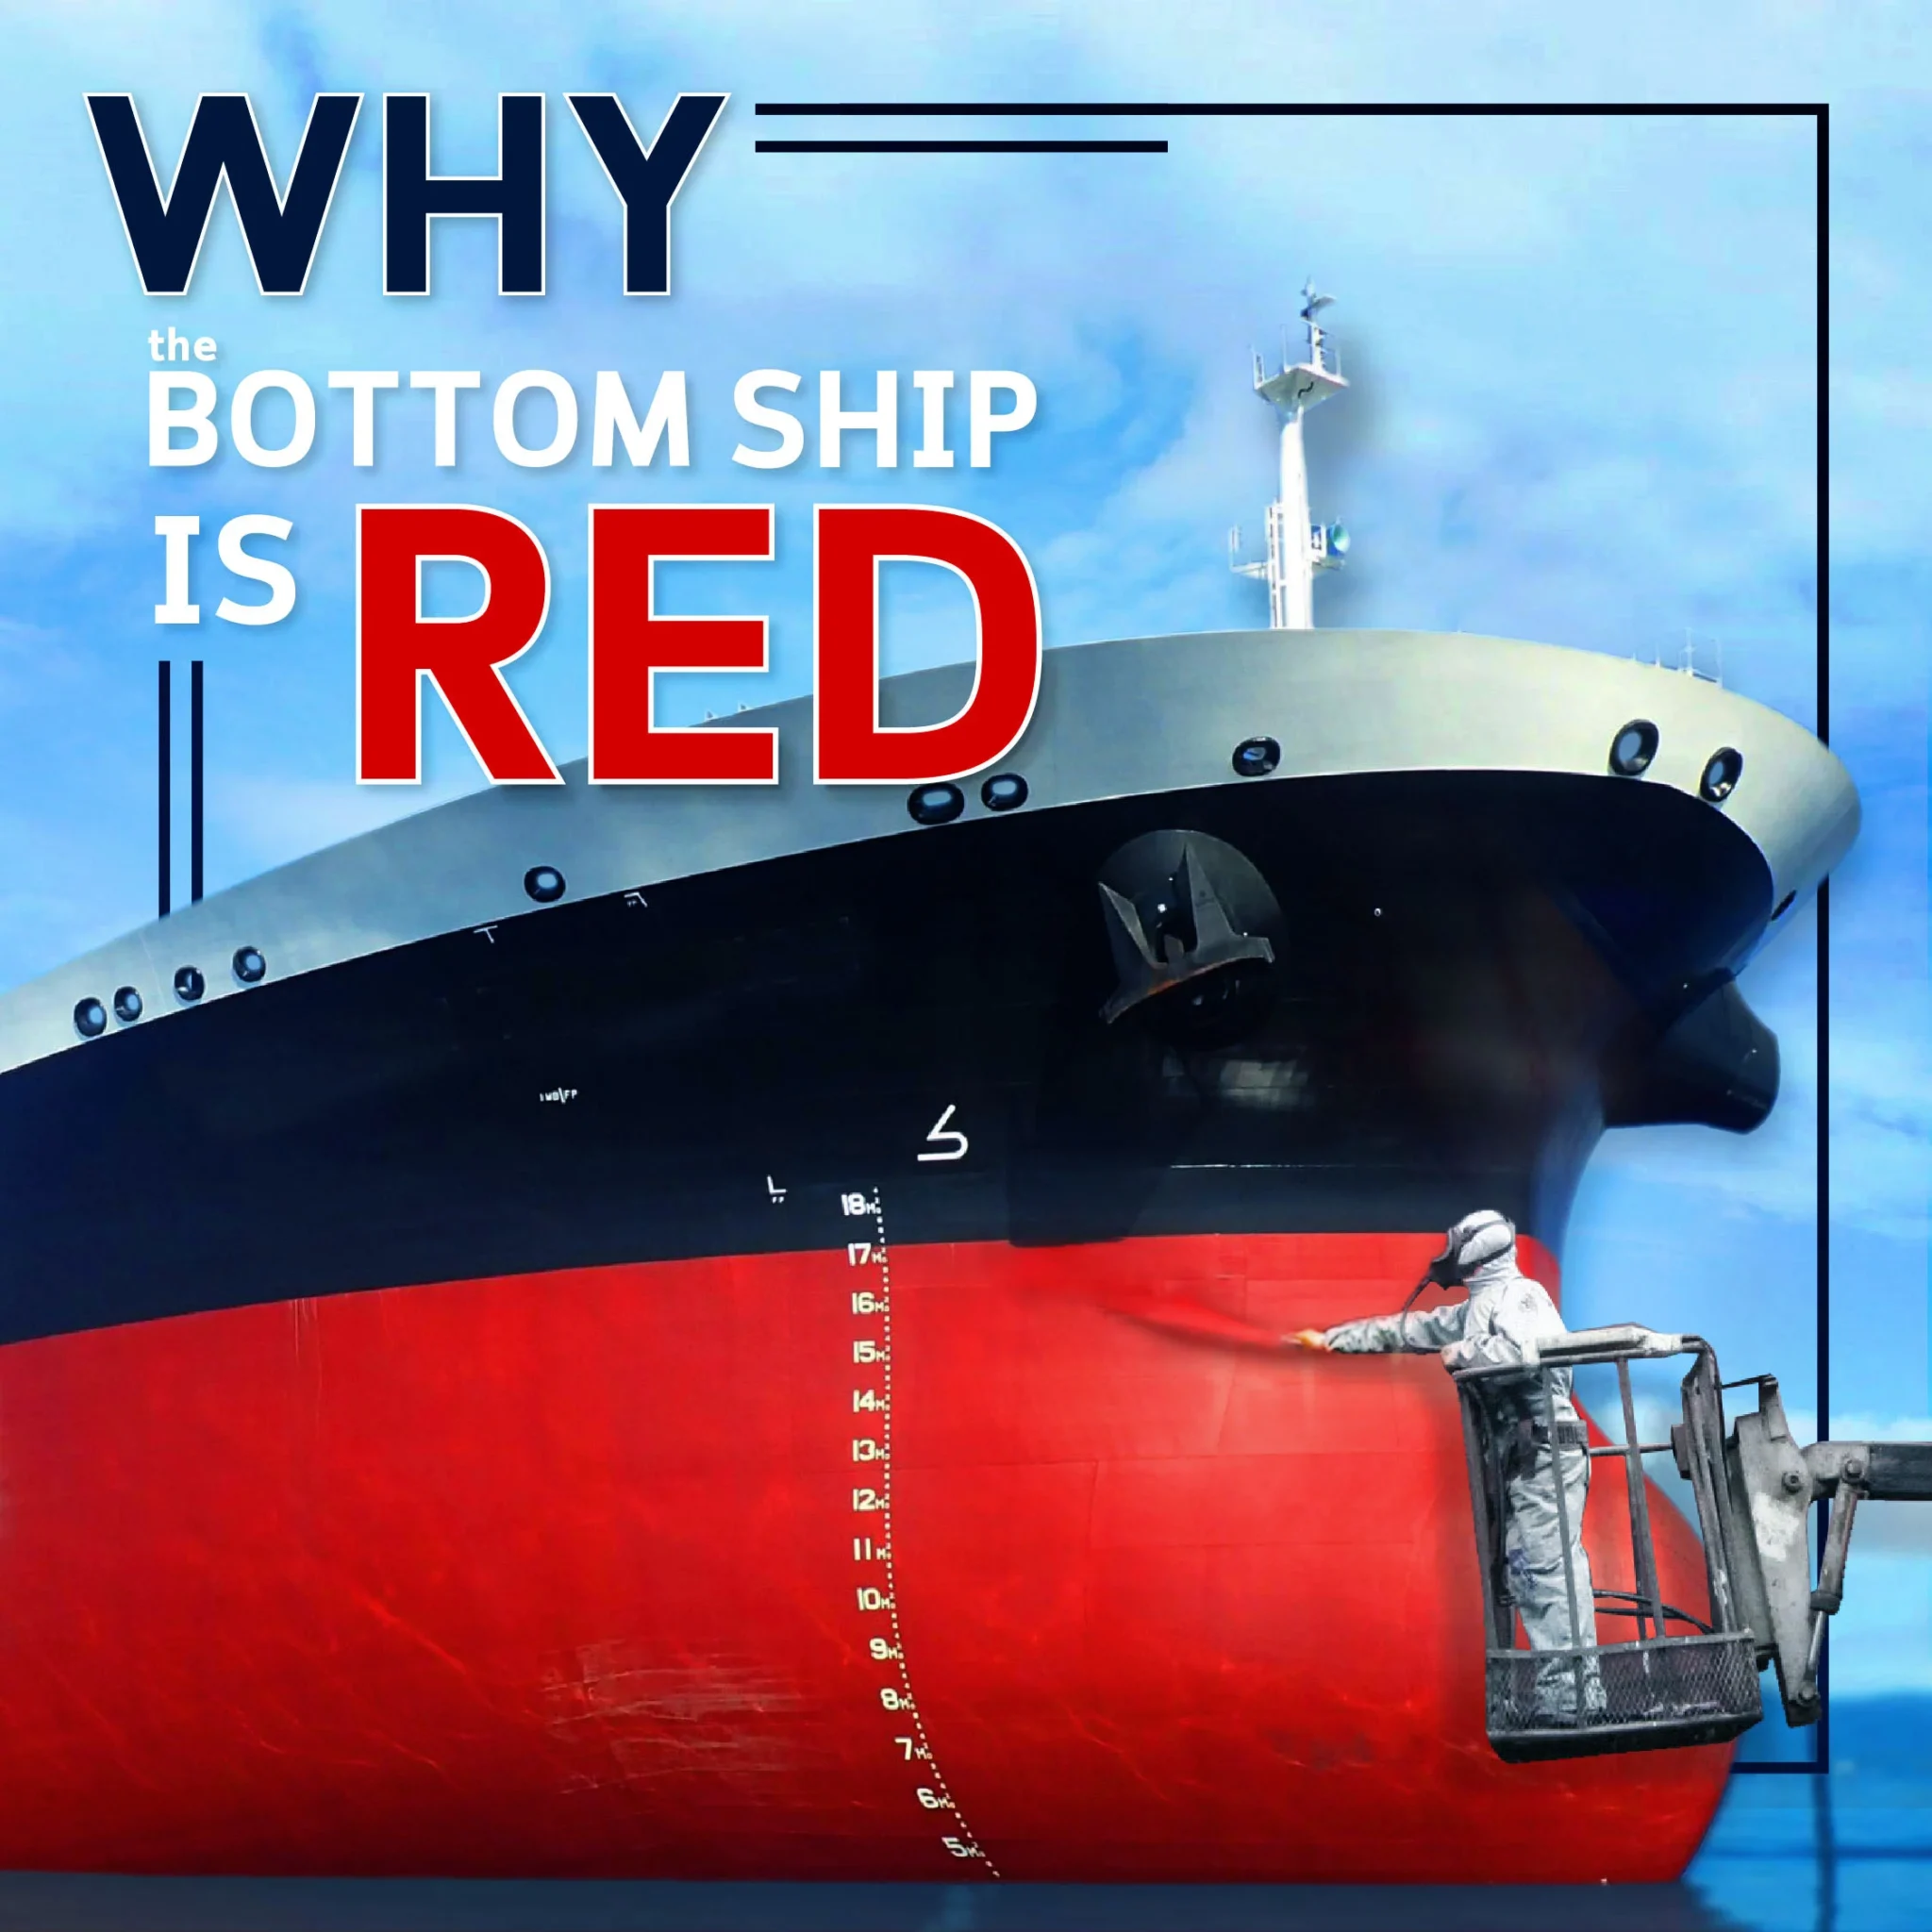 Why is the bottom of the ship painted red?